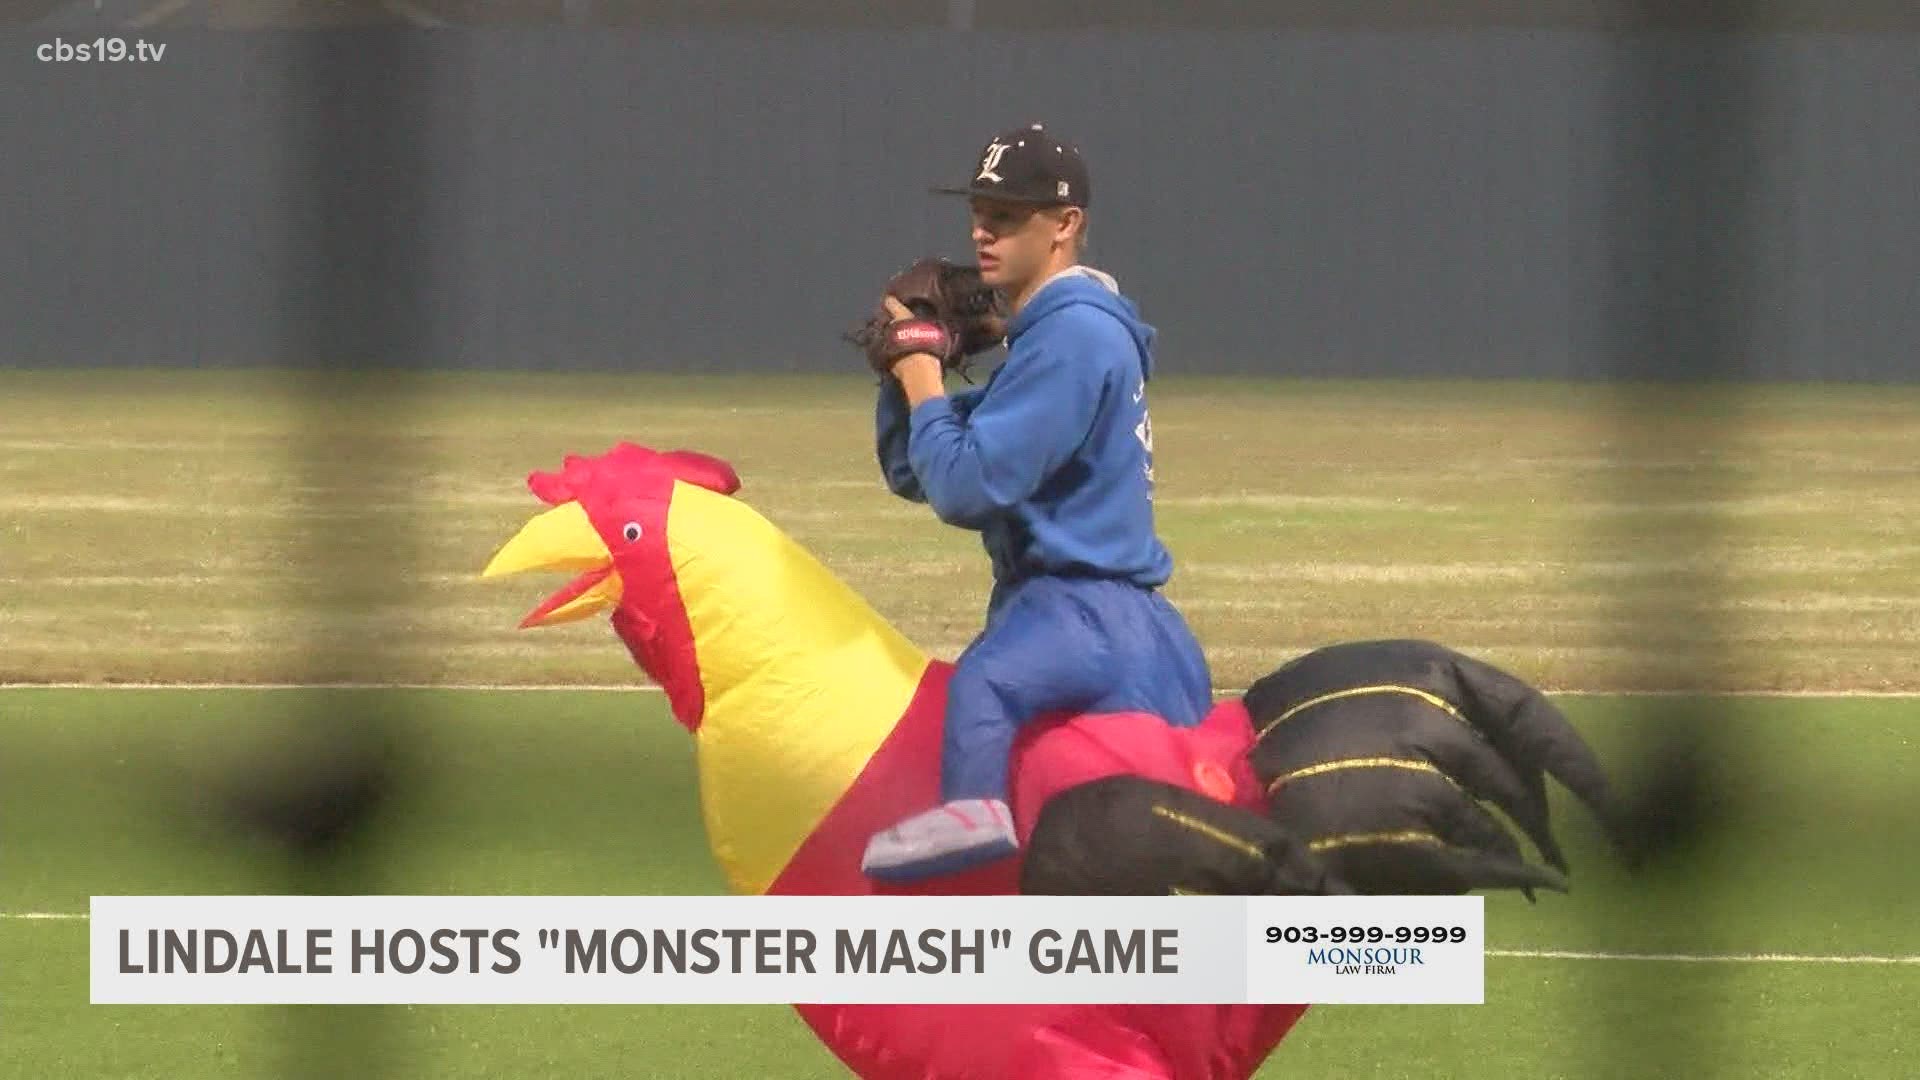 Lindale High School's third annual Monster Mash intra-squad baseball game took place Tuesday night and the costumes were outstanding.